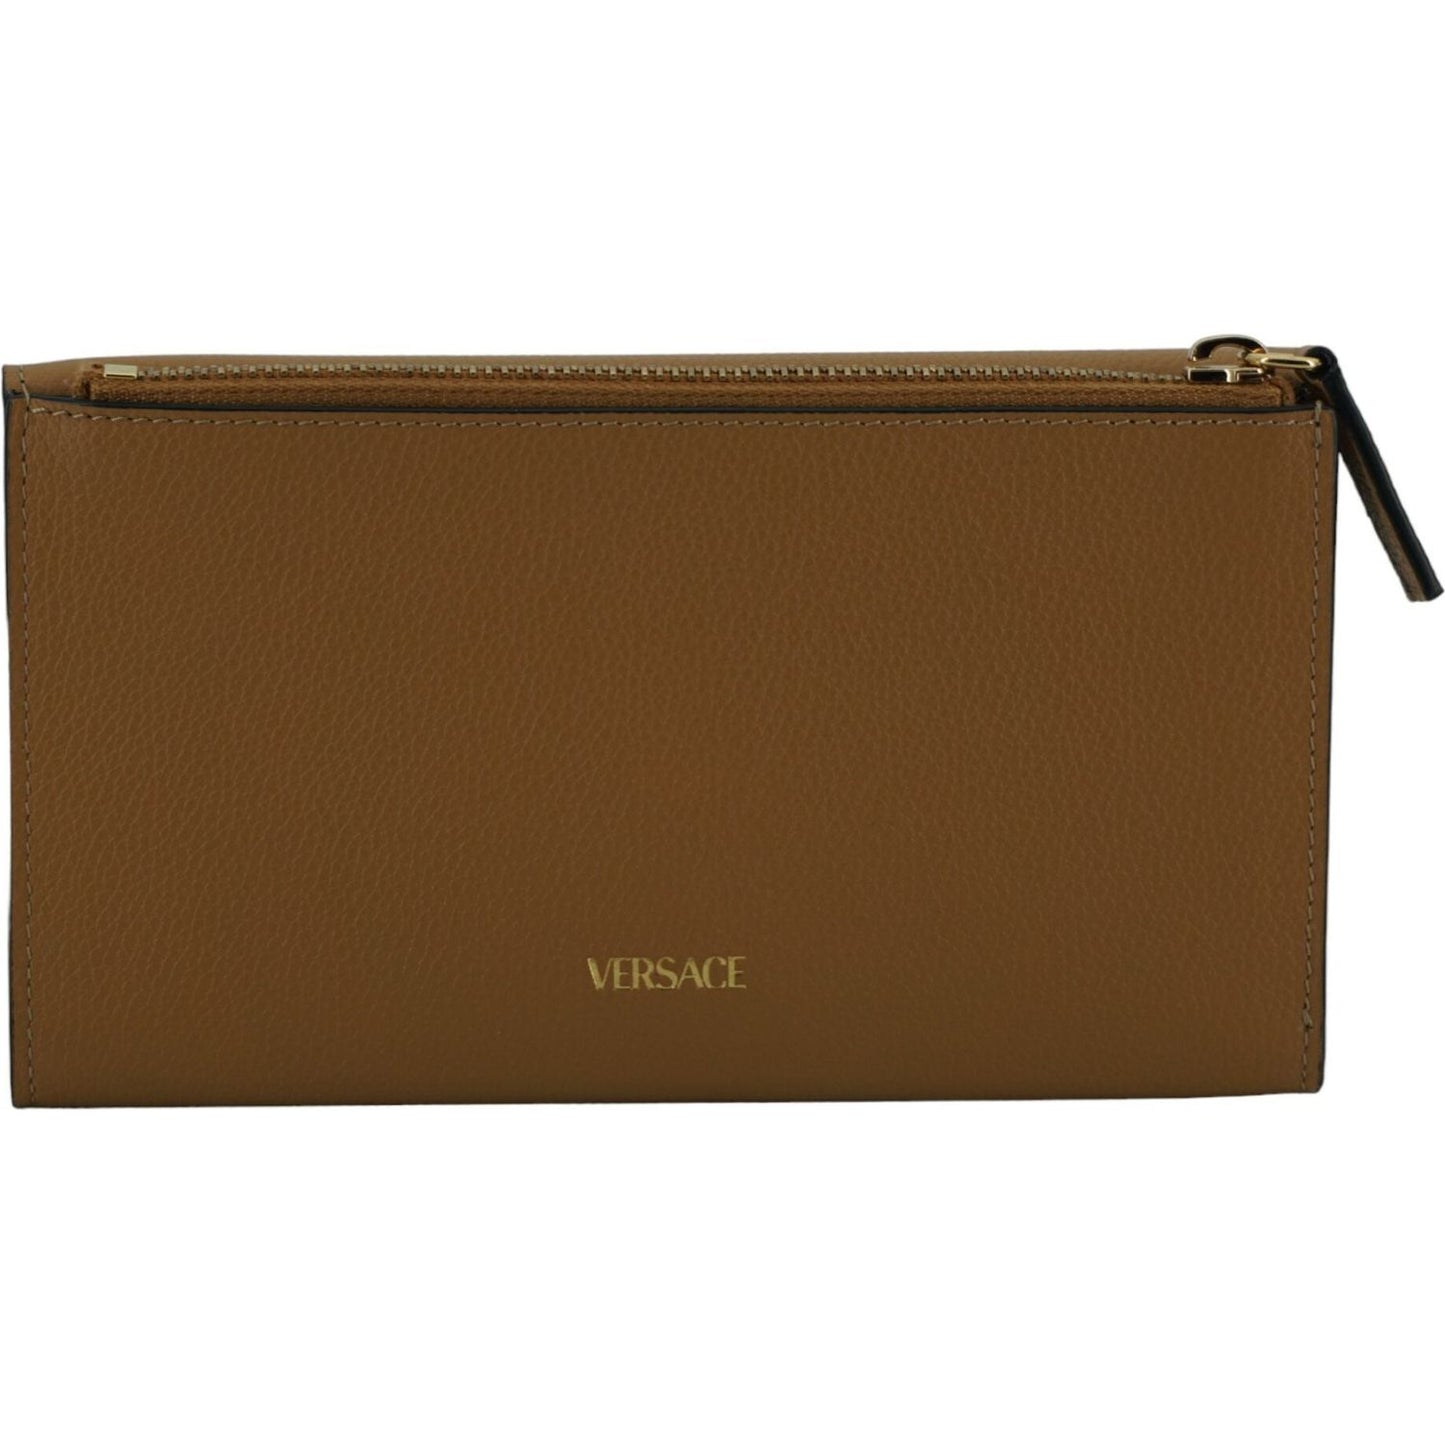 Versace Elegant Calf Leather Wallet with Medusa Logo brown-calf-leather-medusa-wallet